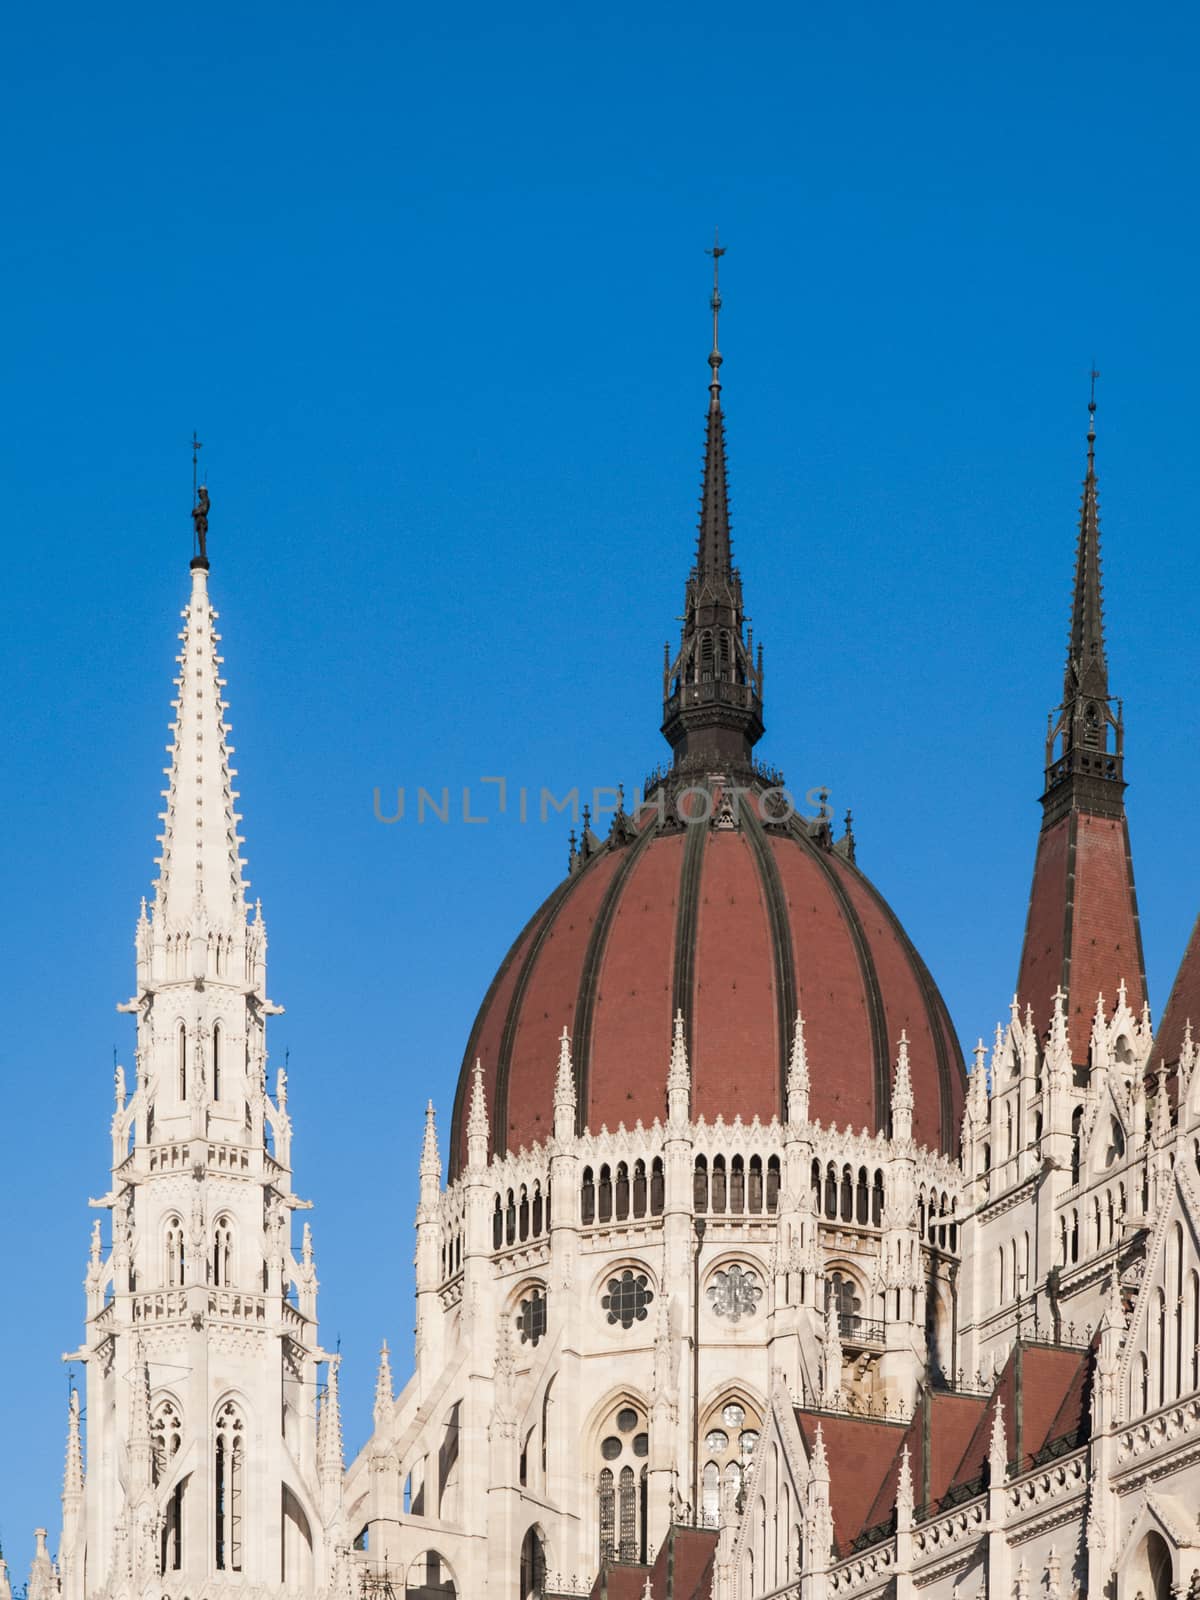 Detailed view of historical building of Hungarian Parliament, aka Orszaghaz, with typical central dome on clear blue sky background. Budapest, Hungary, Europe. It is notable landmark and seat of the National Assembly of Hungary. UNESCO World Heritage Site.